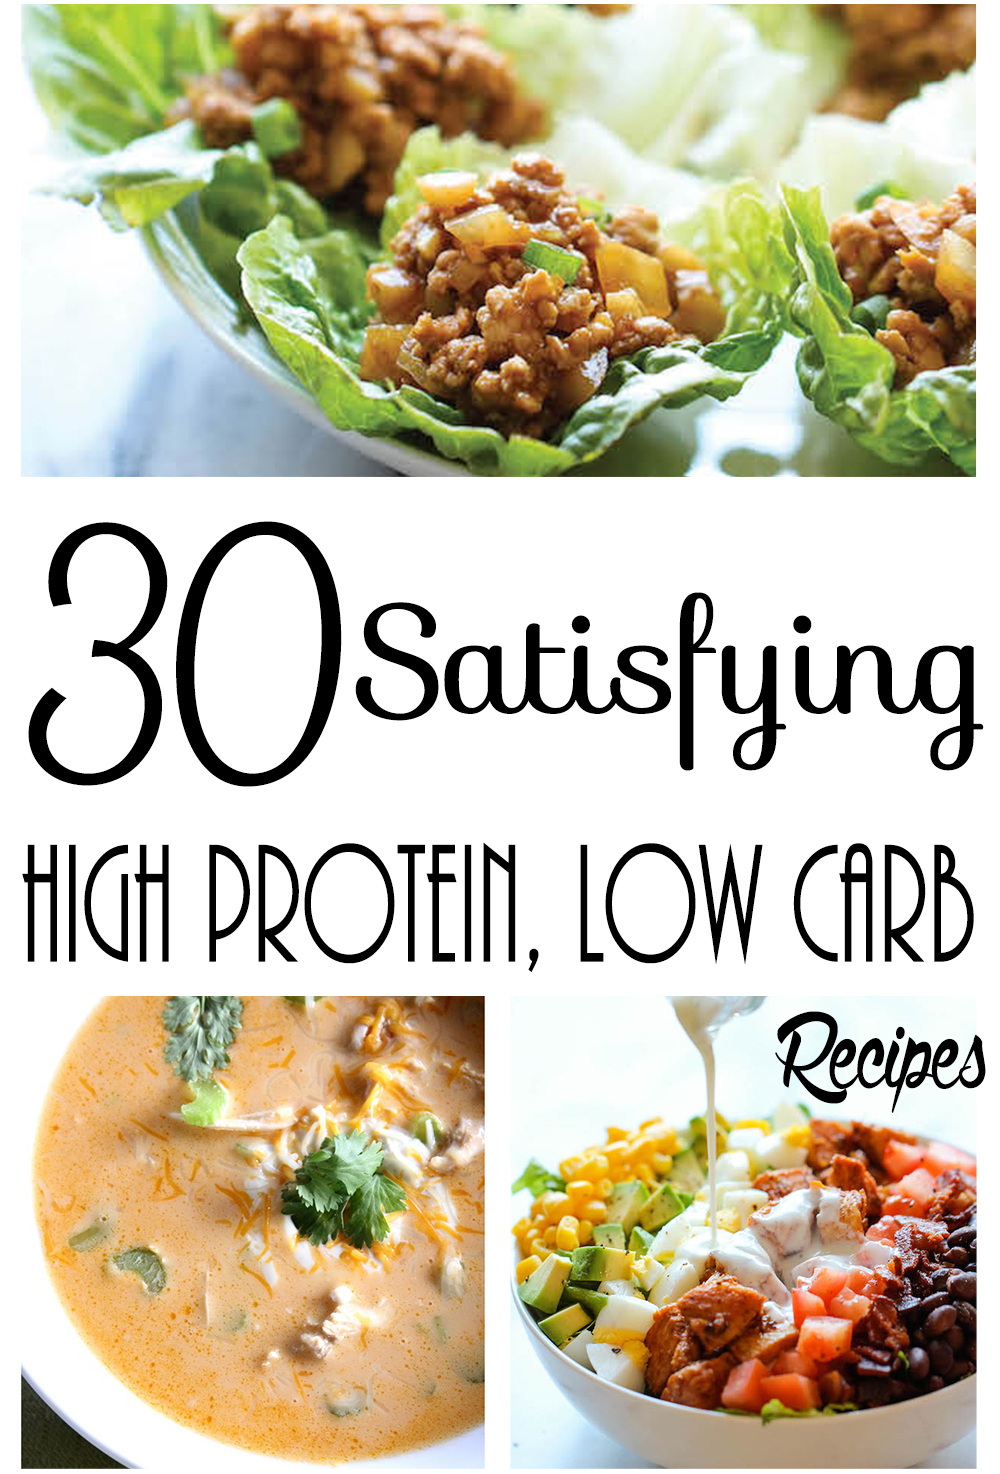 30 Satisfying High Protein, Low Carb Recipes